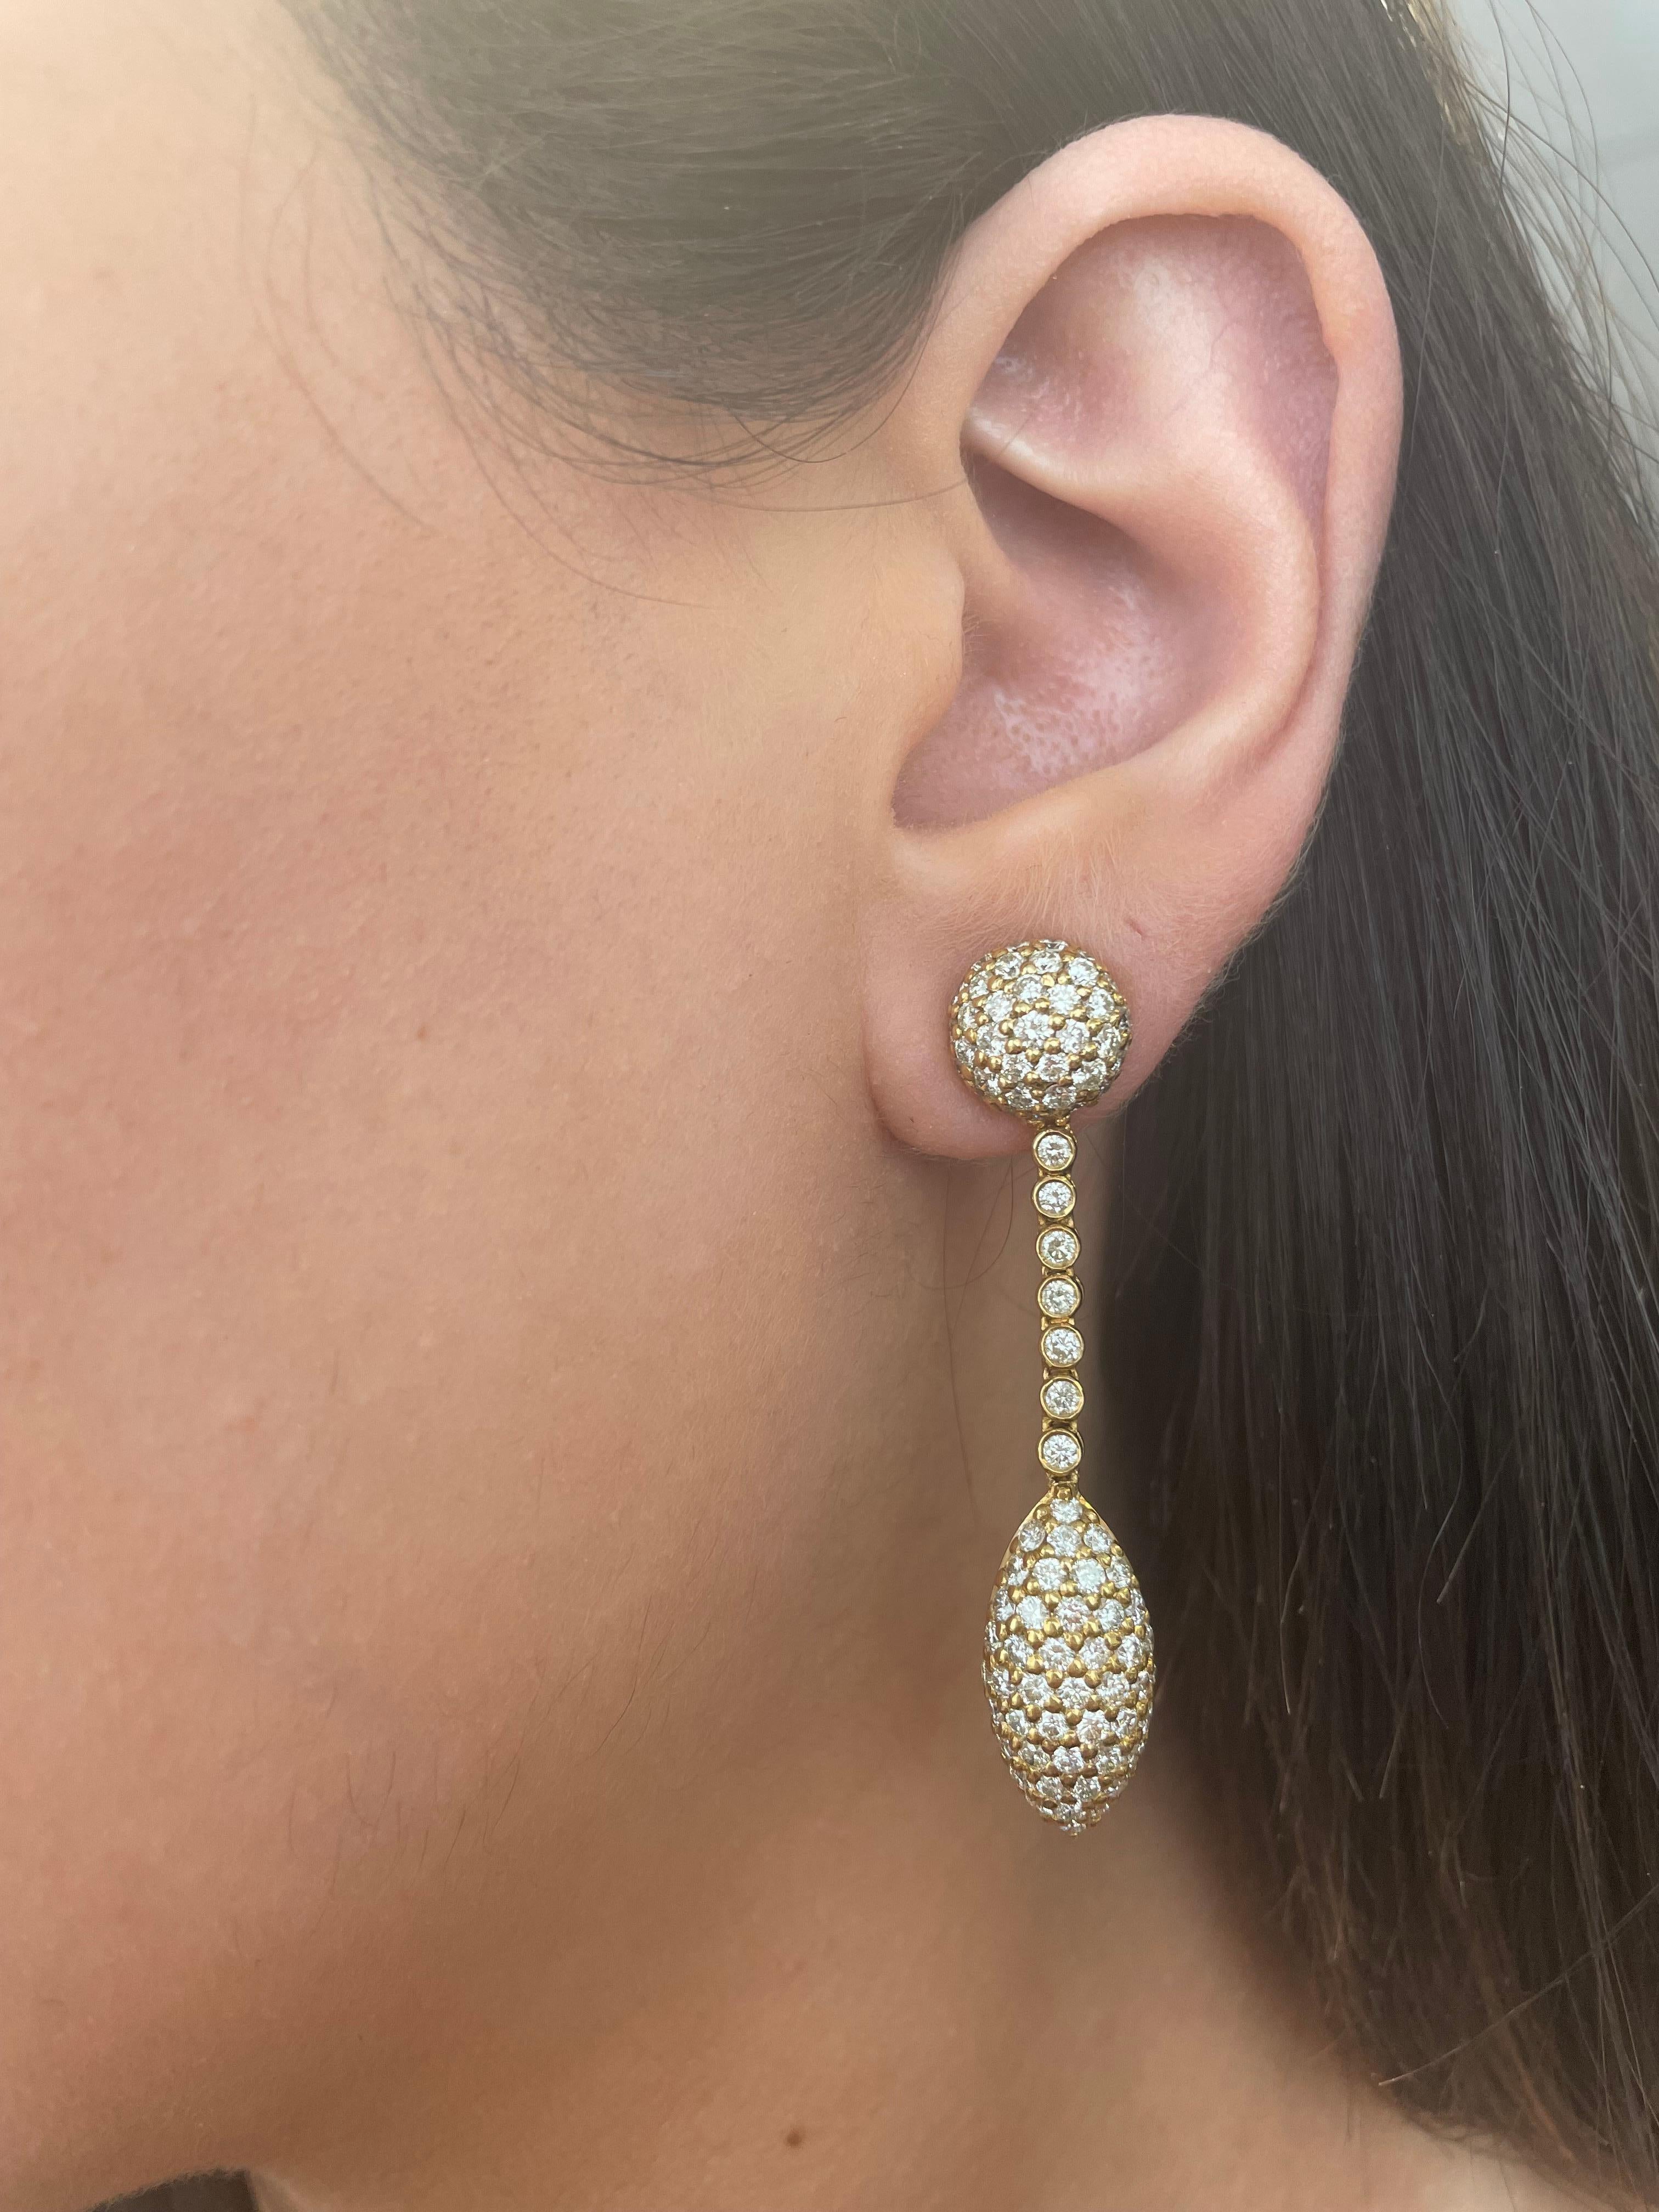 Stunning pave diamond drop earrings.
Round brilliant diamonds, 5.52 carats total. Approximately G/H color grade and SI clarity grade. Pave and bezel set, 18k yellow gold.
3.32ct total diamond weight. 
Accommodated with an up to date appraisal by a